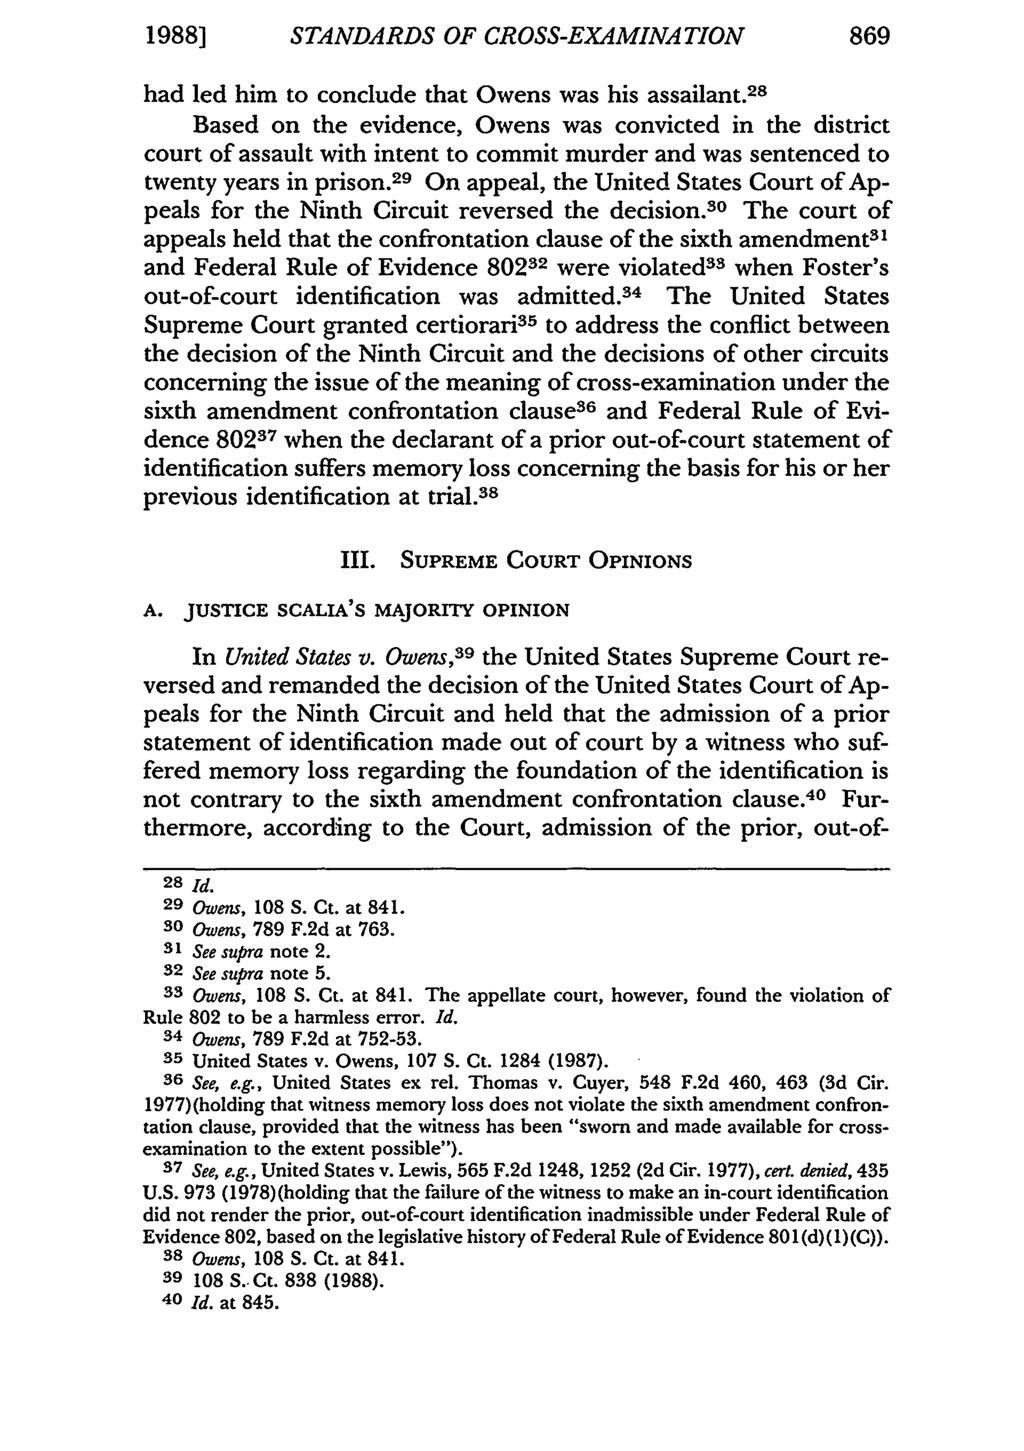 19881 STANDARDS OF CROSS-EXAMINATION 869 had led him to conclude that Owens was his assailant.